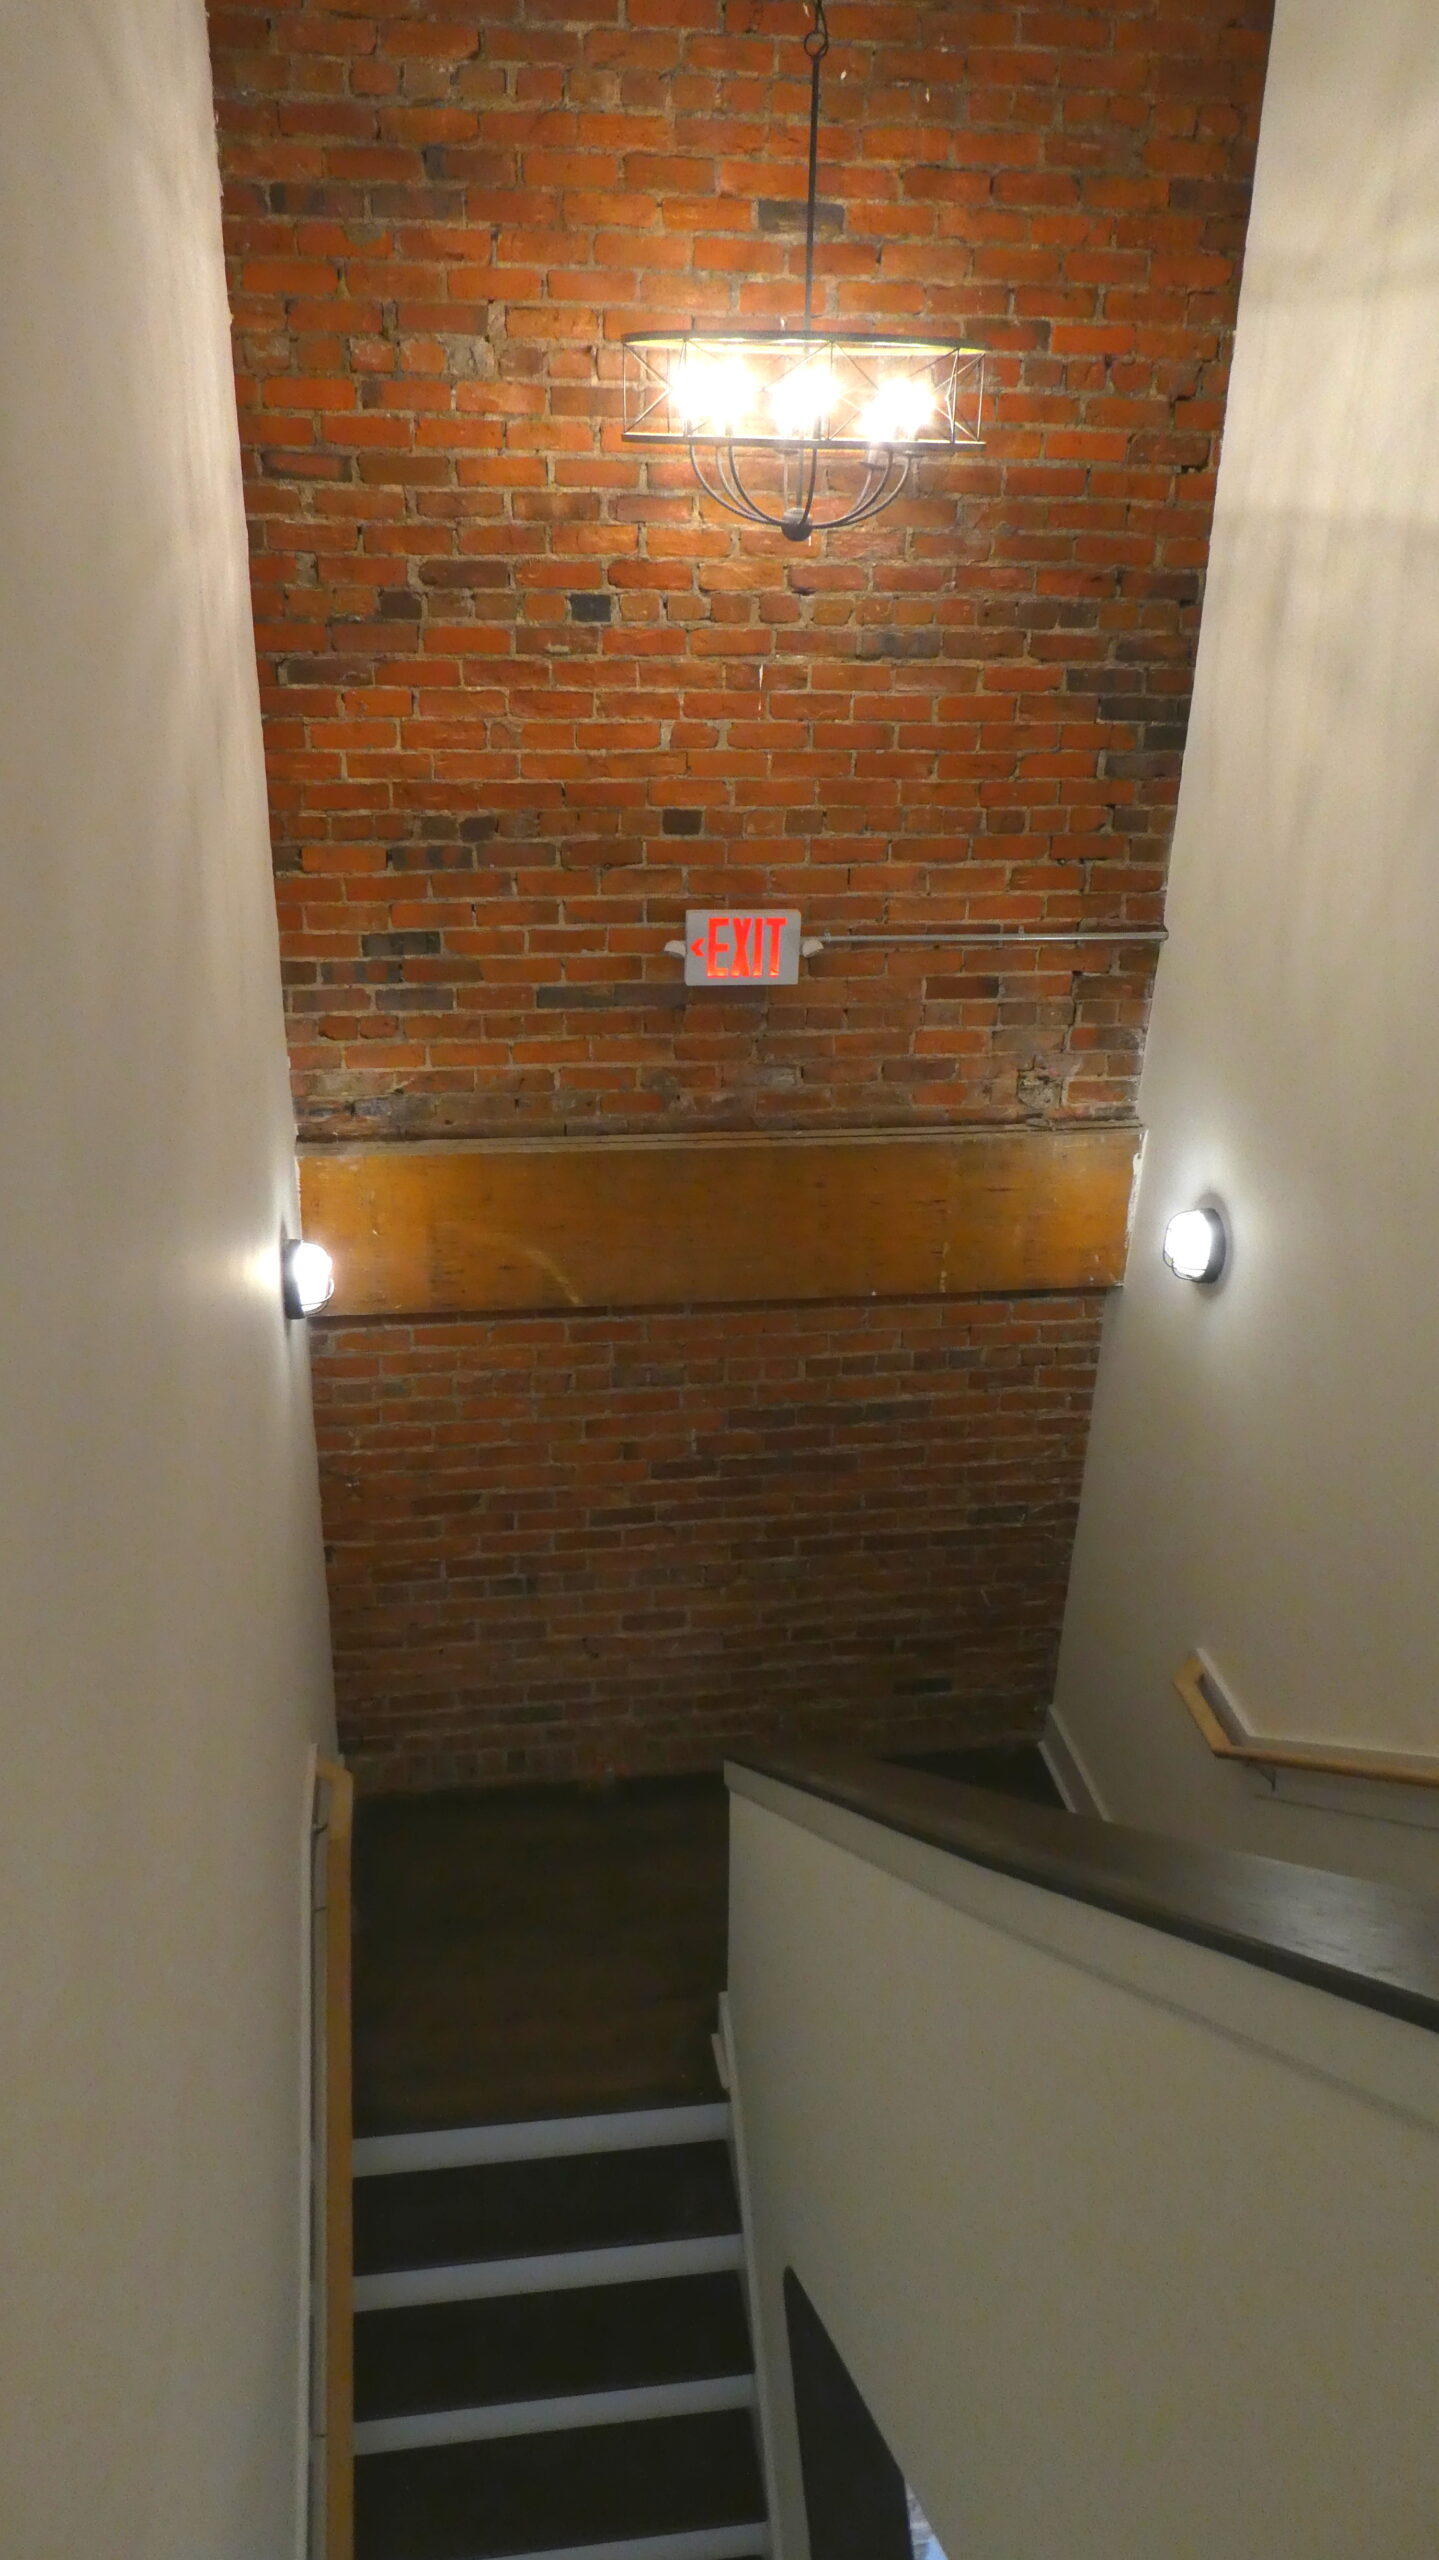 Photo of the stairwell at the Indie Ice Lofts